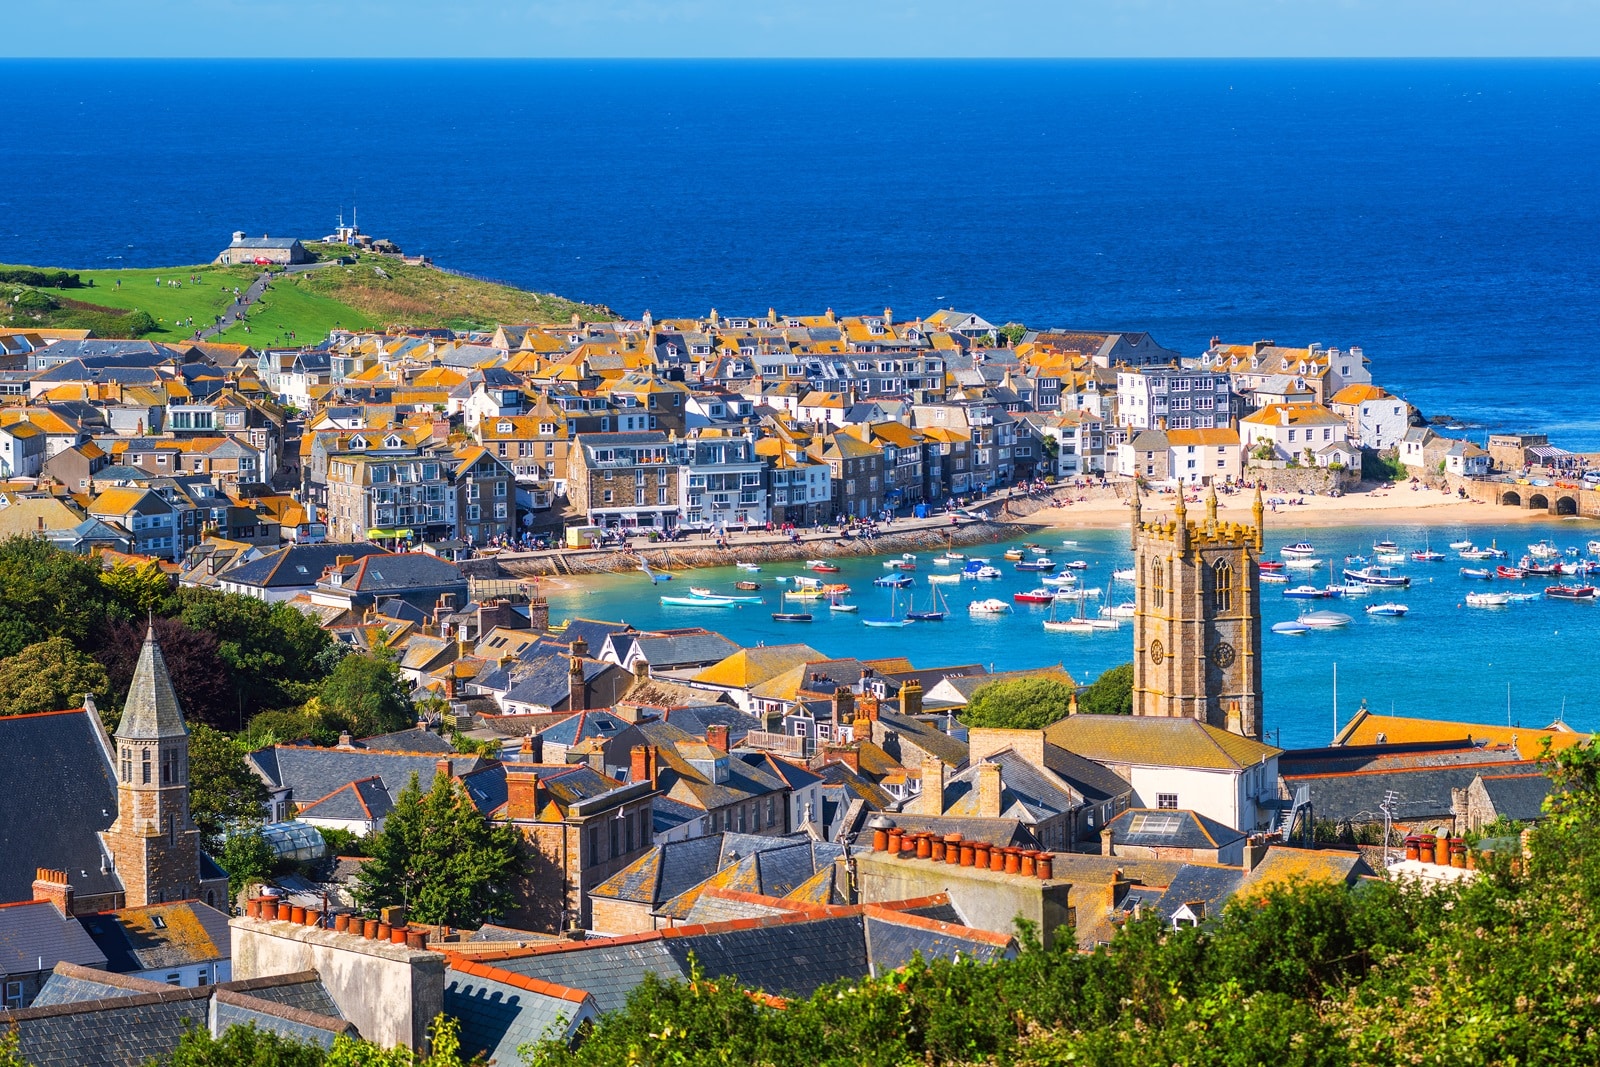 Image Credit: Shutterstock / Boris Stroujko <p>Cornwall pairs its stunning views with schools that are quickly climbing the ranks. It’s not just the scenery that’s bright here.</p>